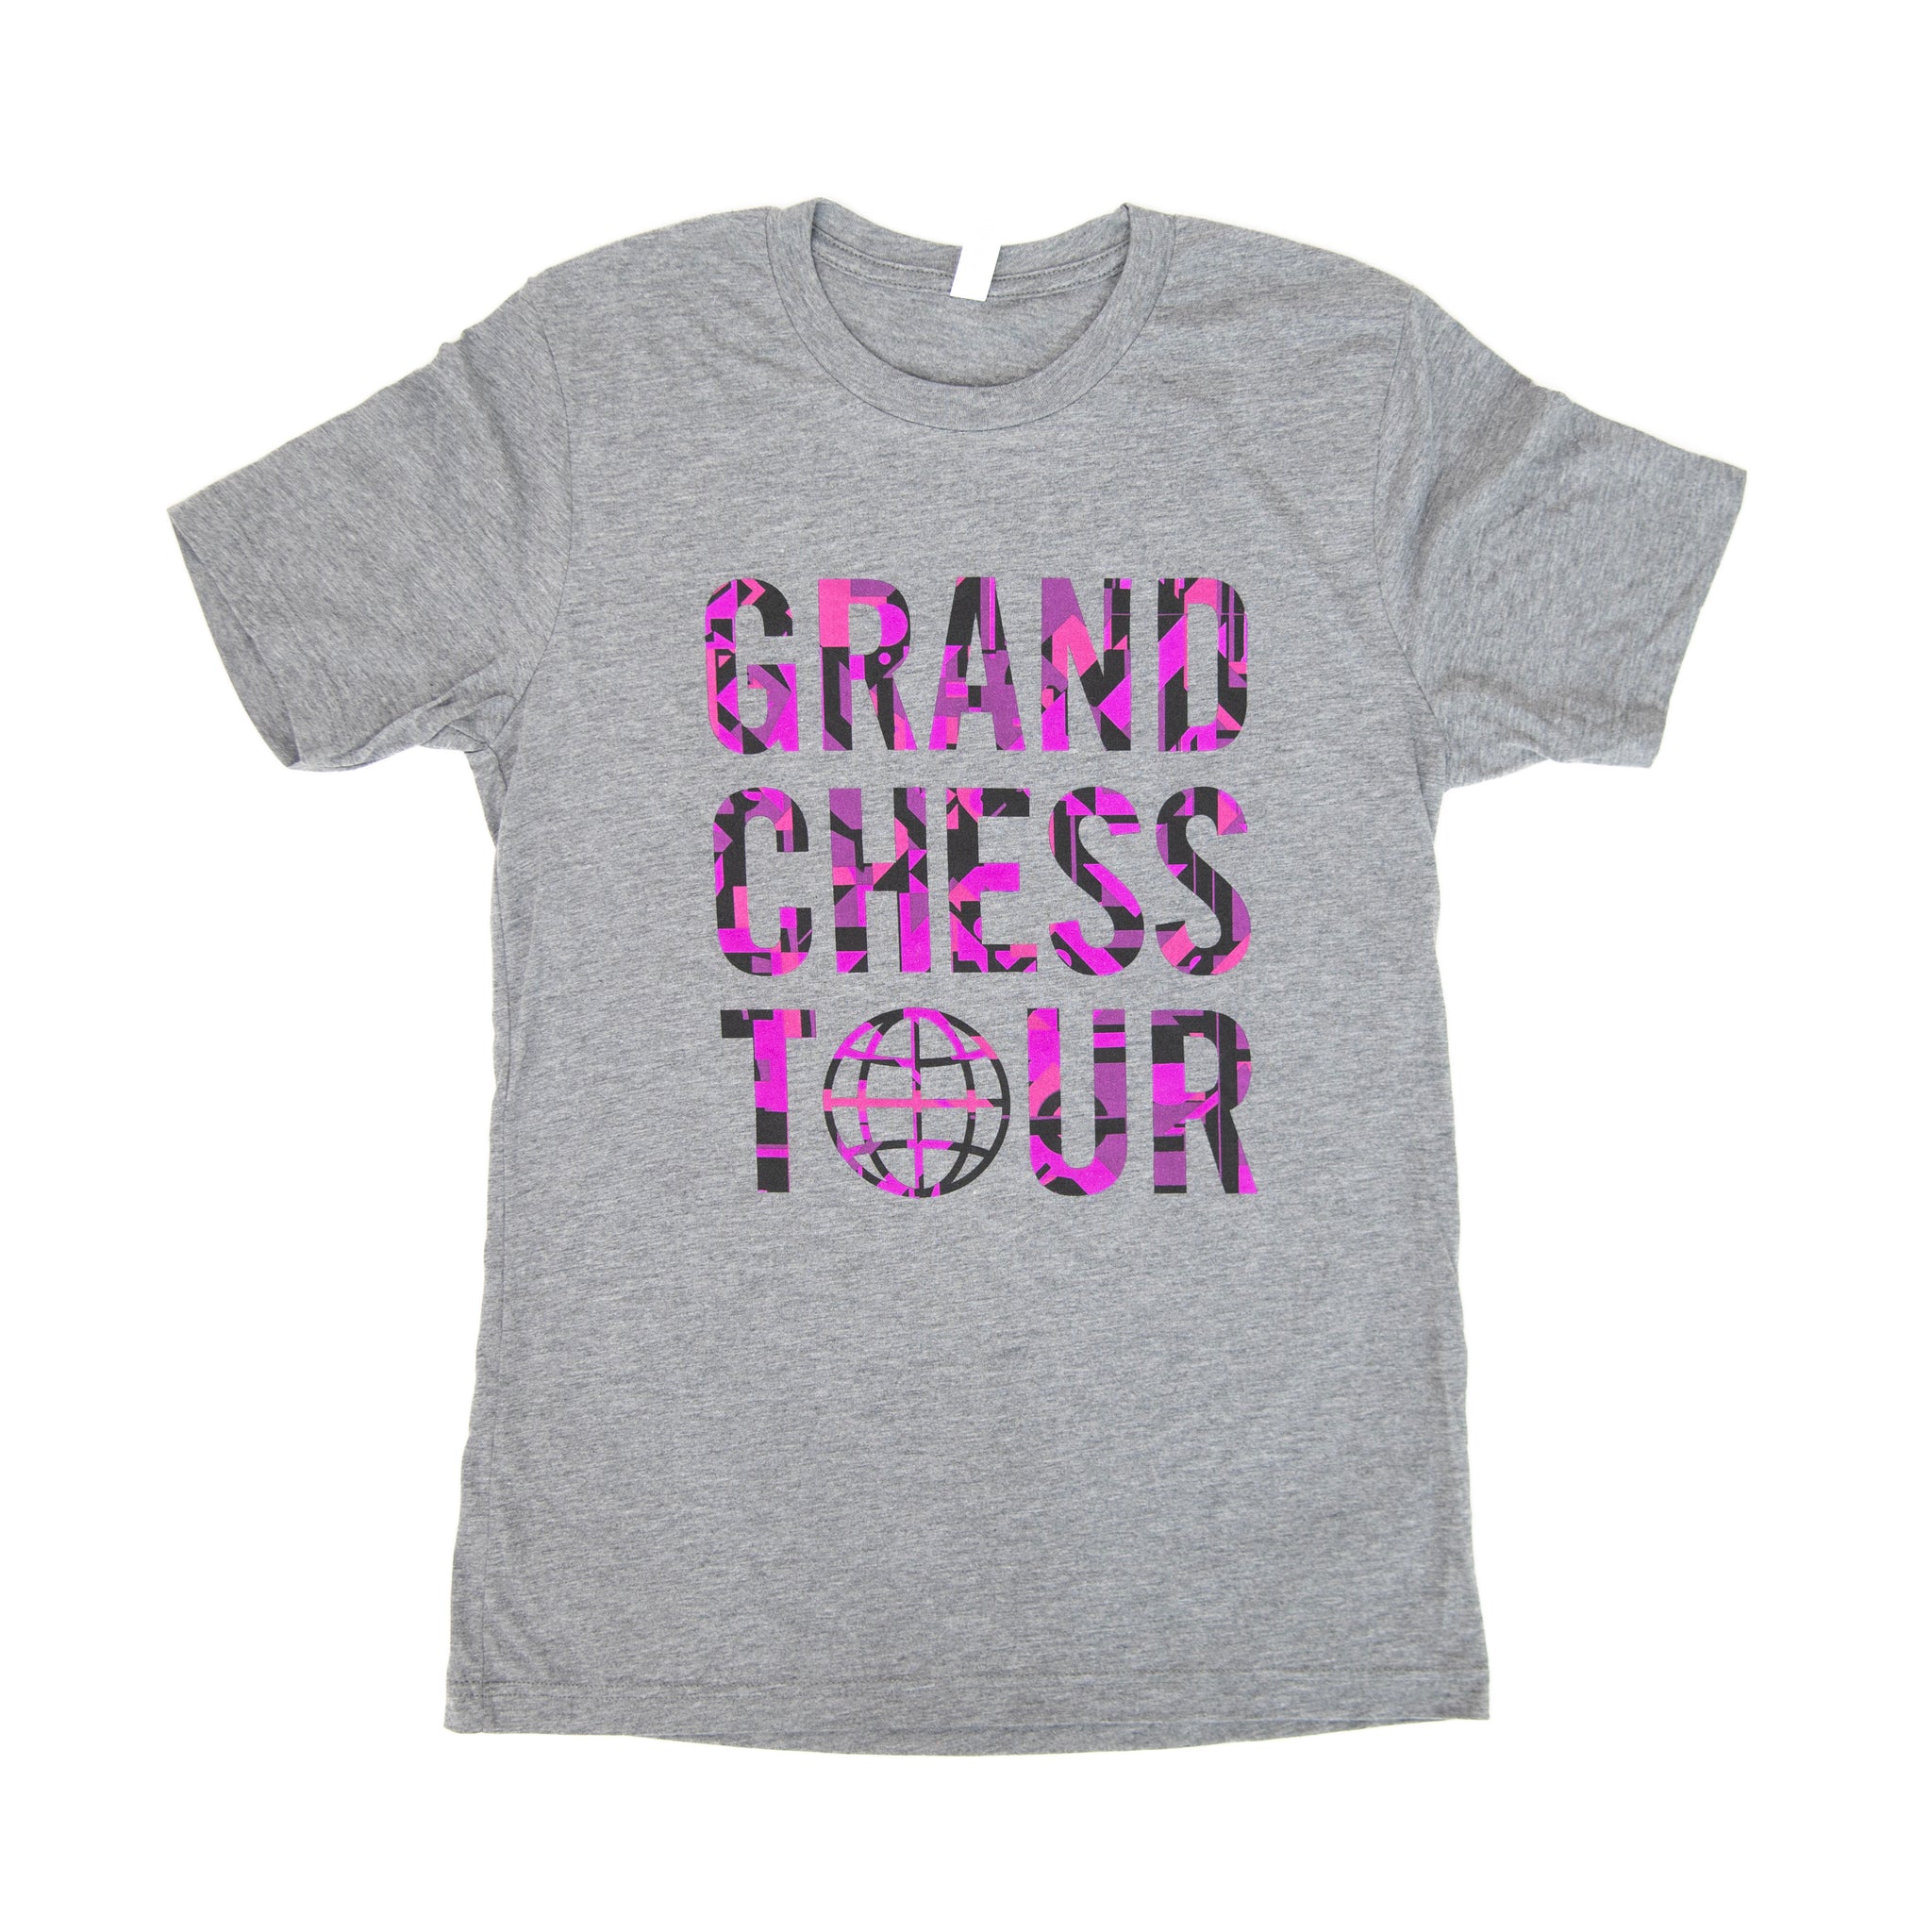 Chess Candidates Tournament 2022 Classic T-Shirt for Sale by